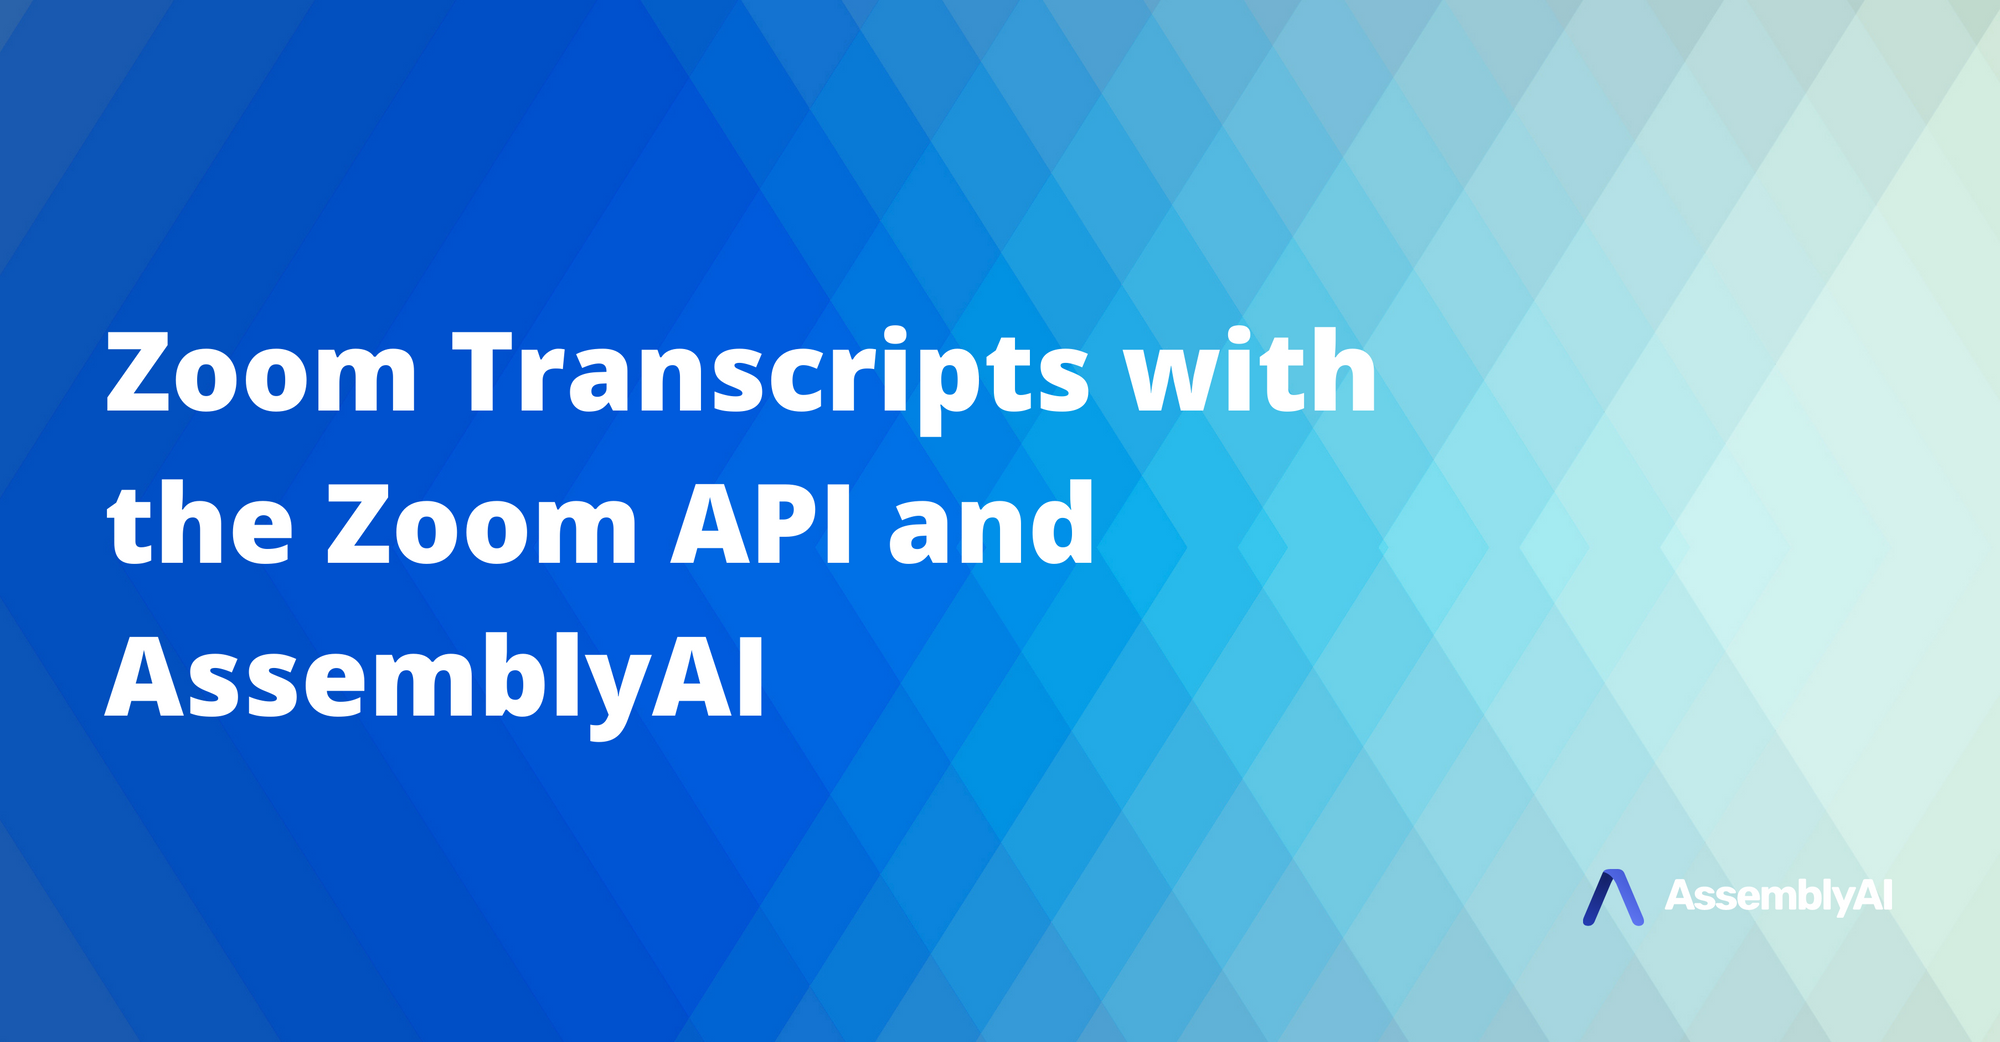 How to get Zoom Transcripts with the Zoom API